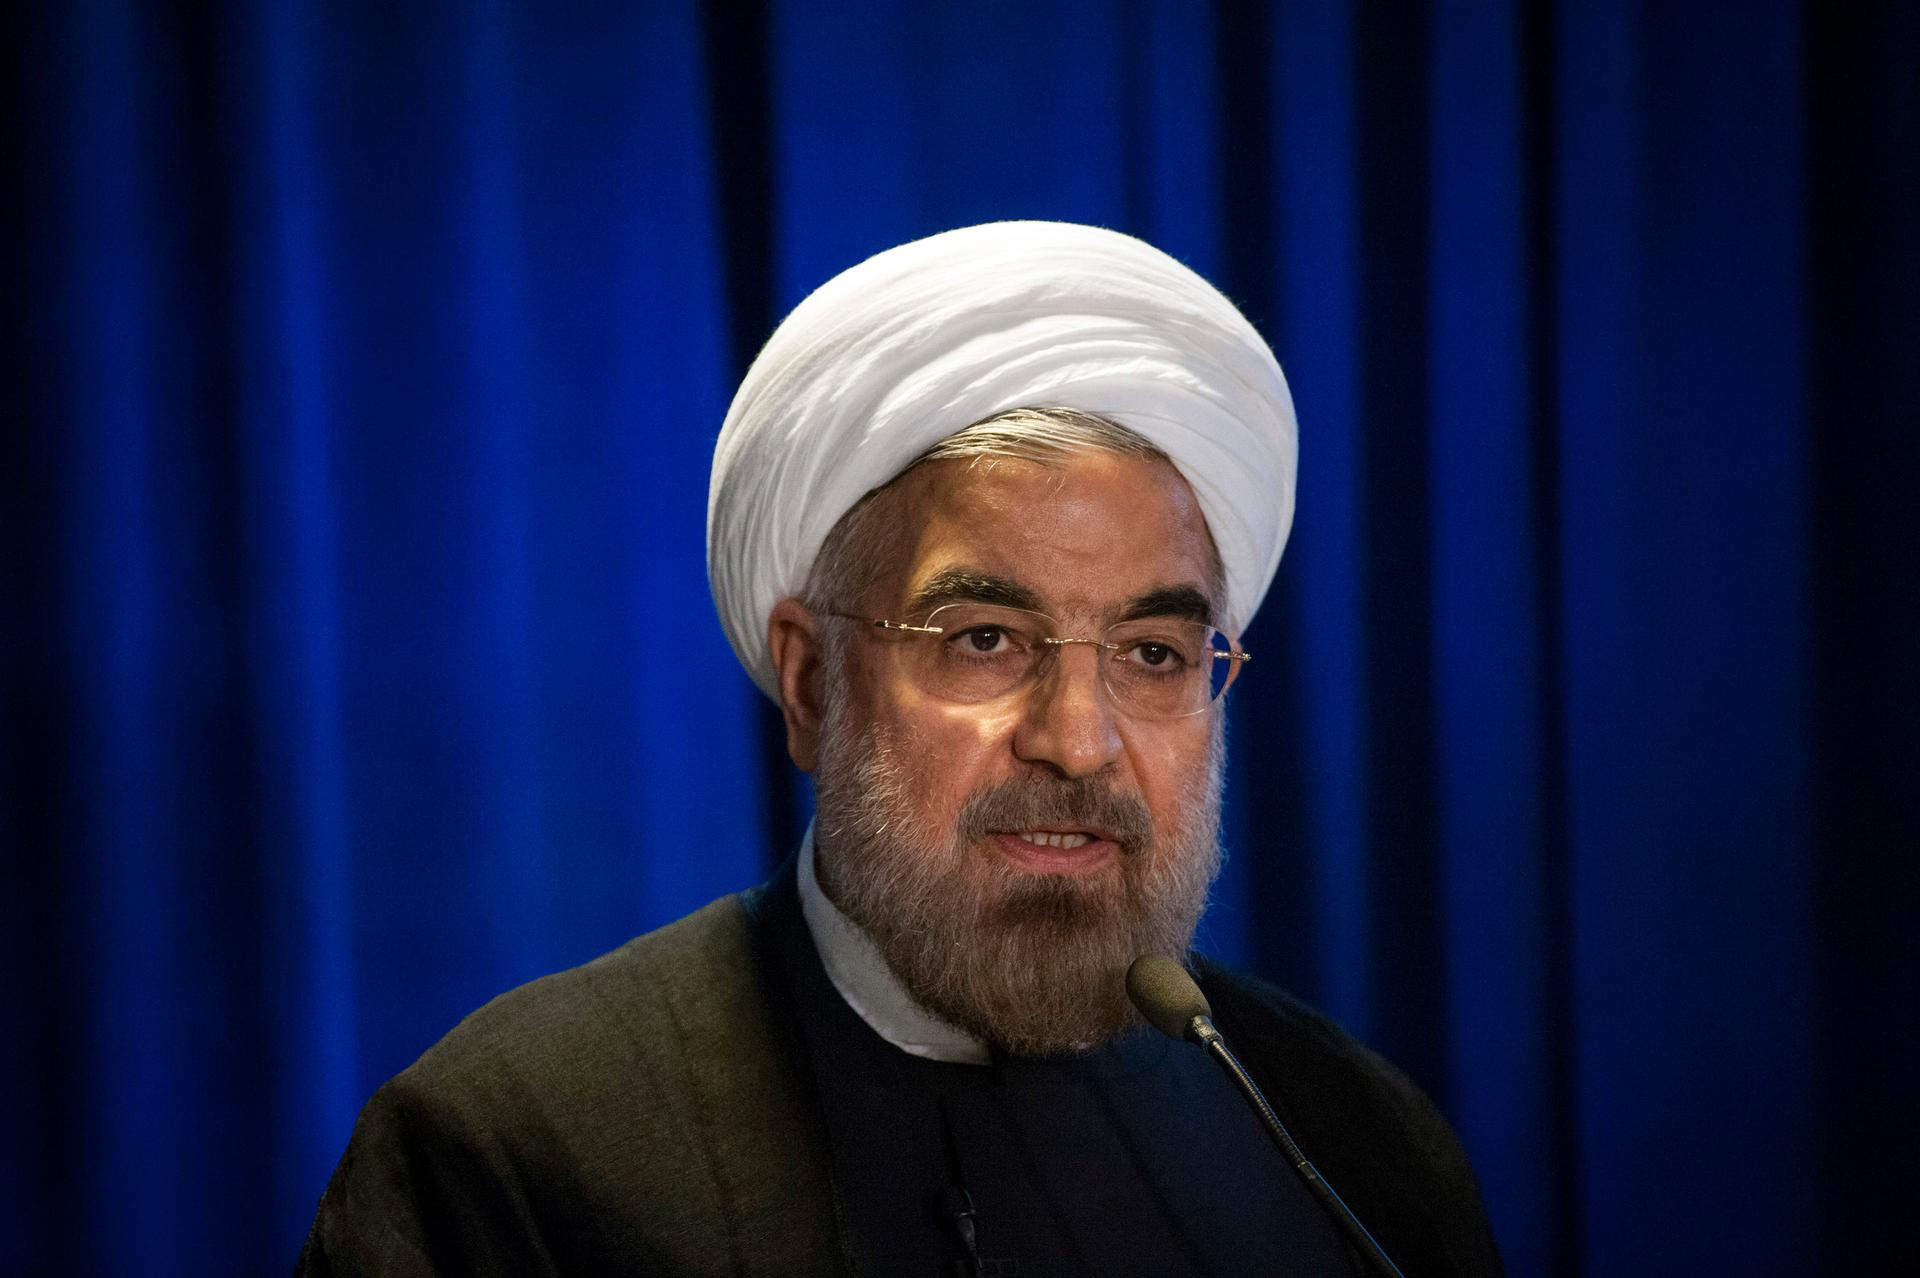 Iran's President Hasan Rouhani speaks during an event in New York